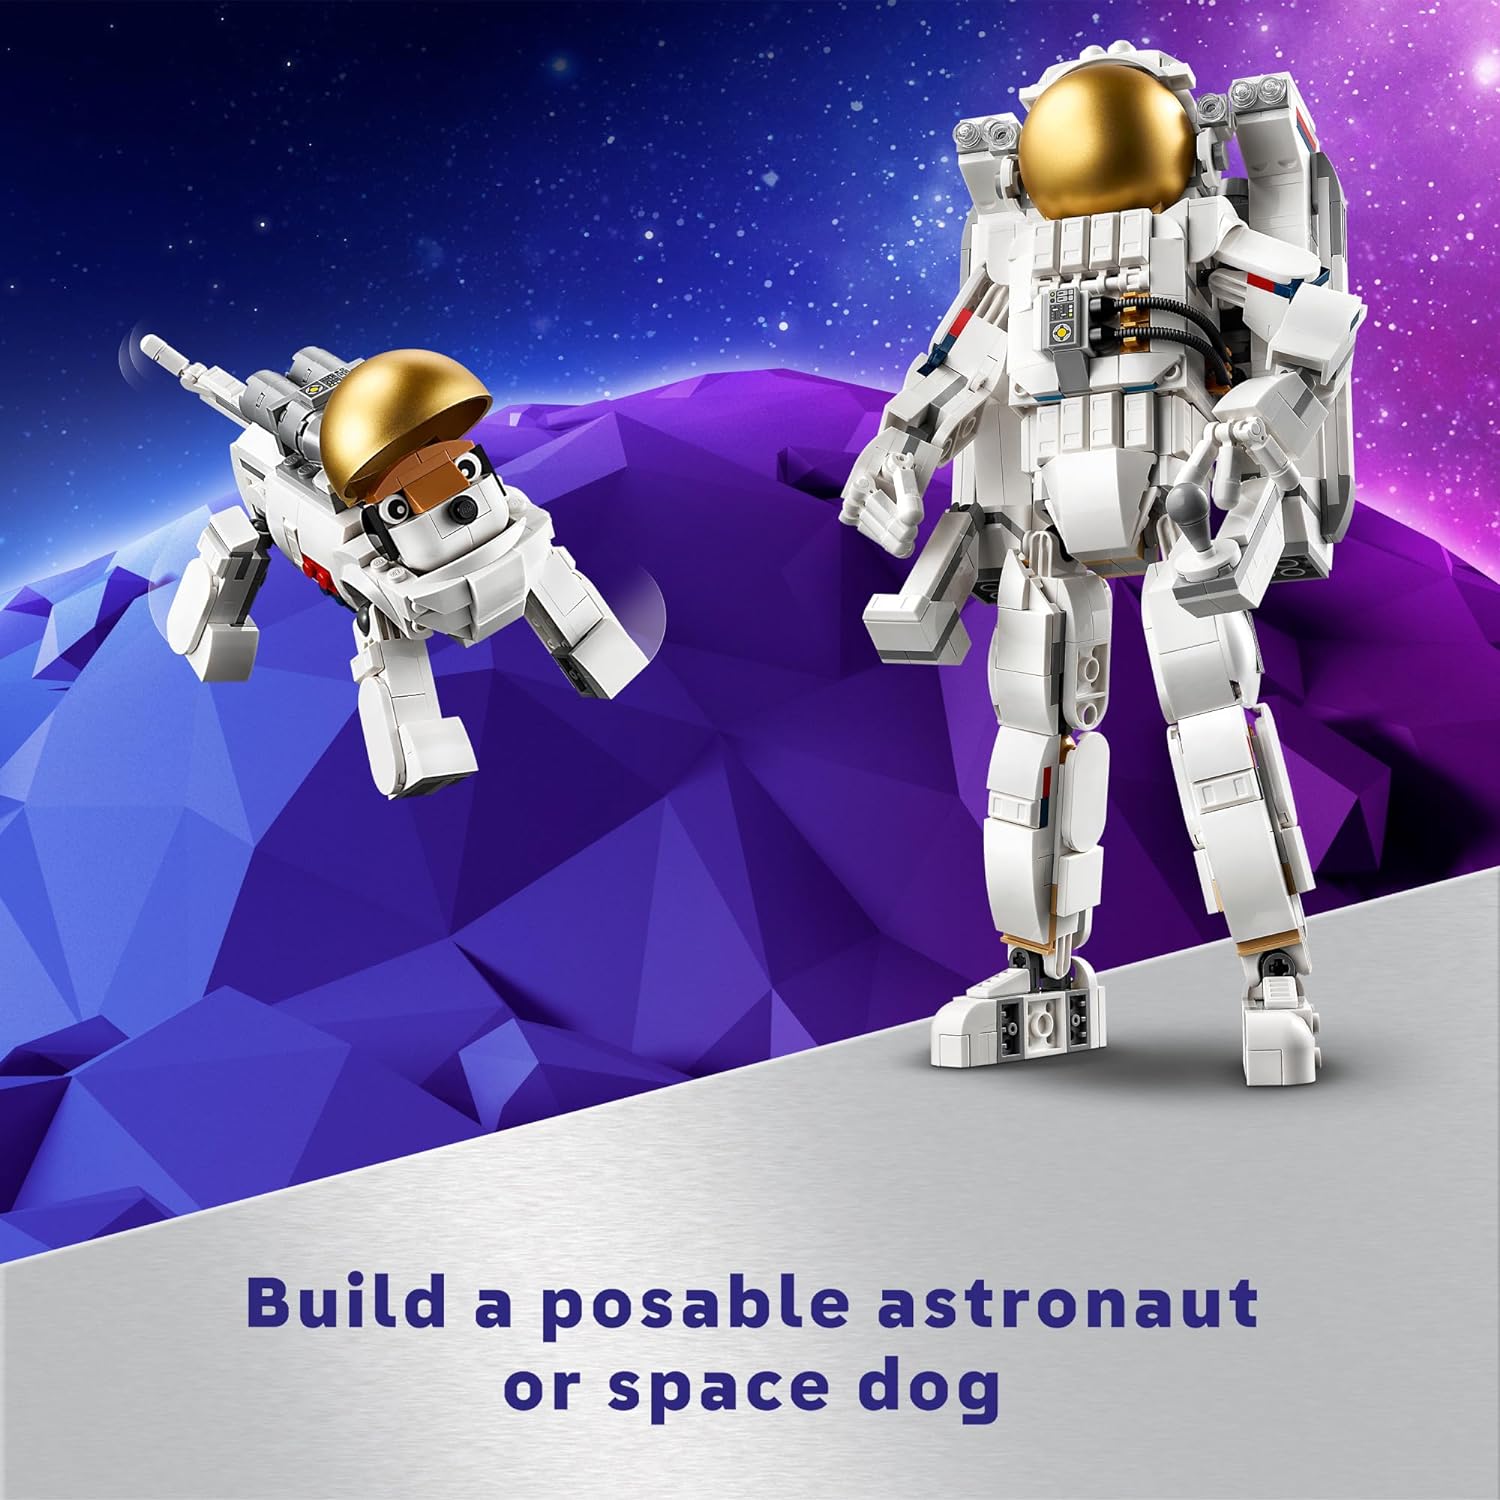 LEGO Creator 31152 3 in 1 Space Astronaut Toy, Building Set Transforms from Astronaut Figure to Space Dog to Viper Jet, Space-Themed Gift Idea for Boys and Girls